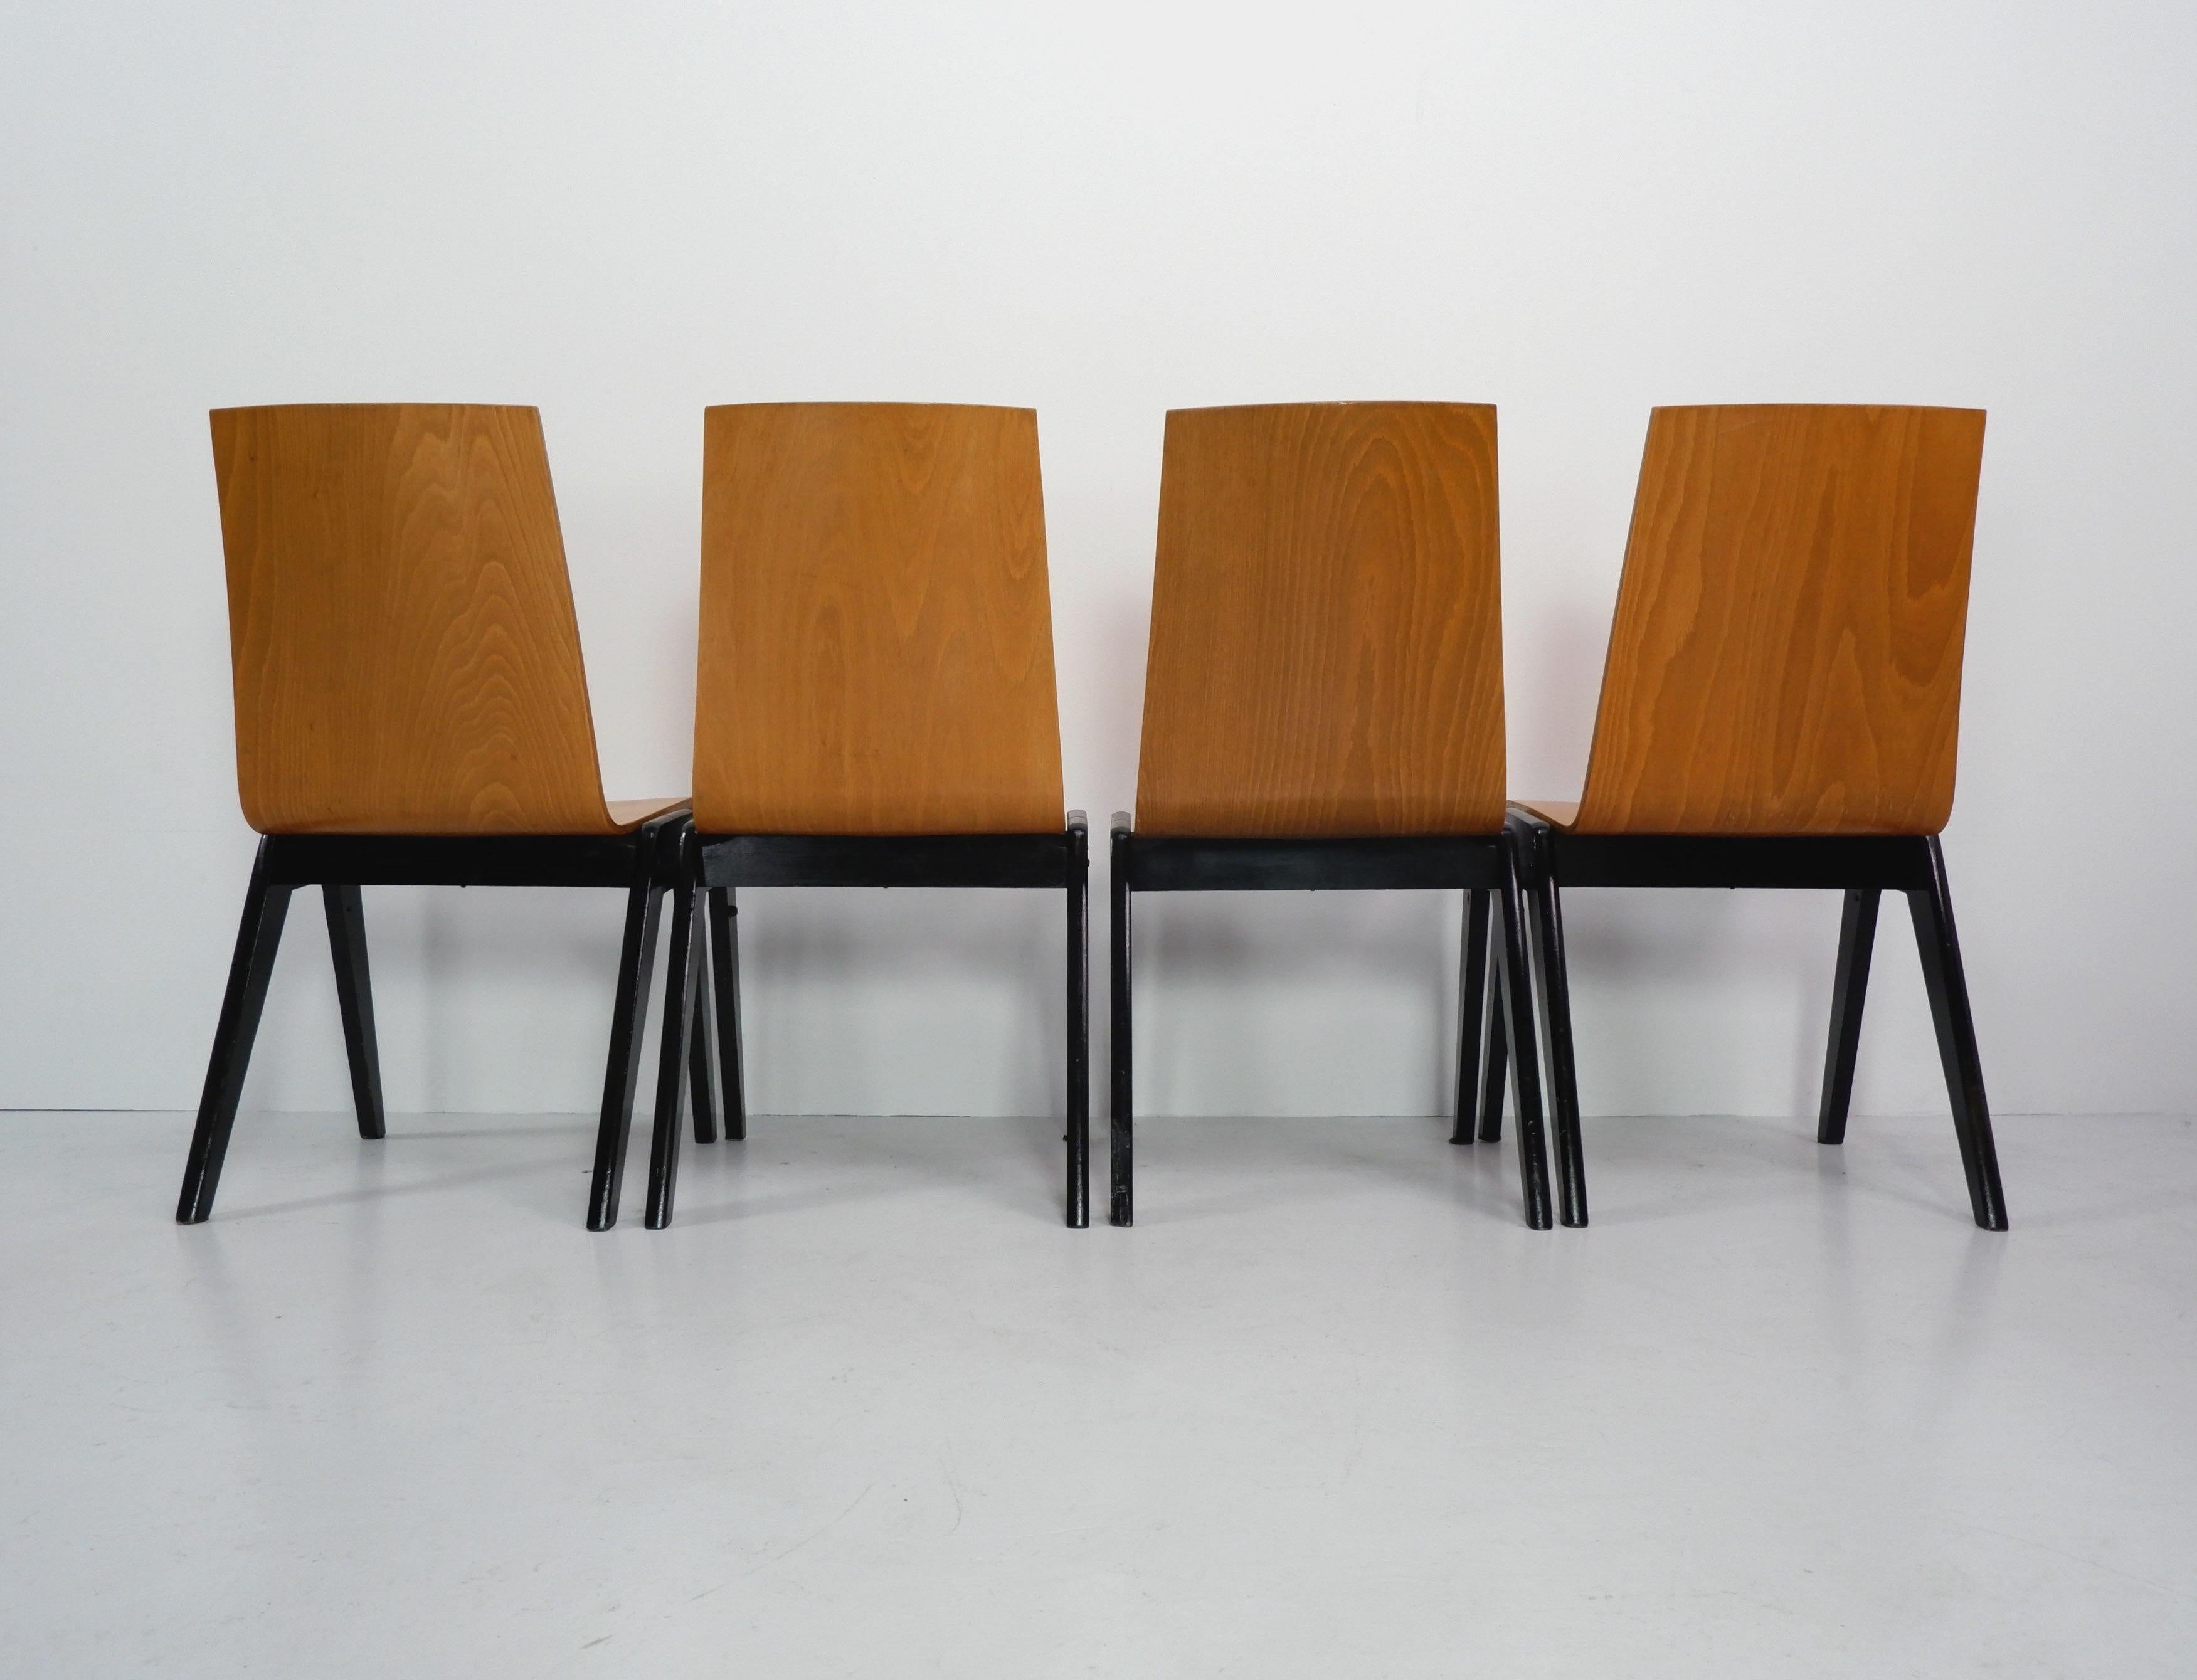 20th Century Plywood Stacking Chairs attrb. Roland Rainer, c.1950 For Sale